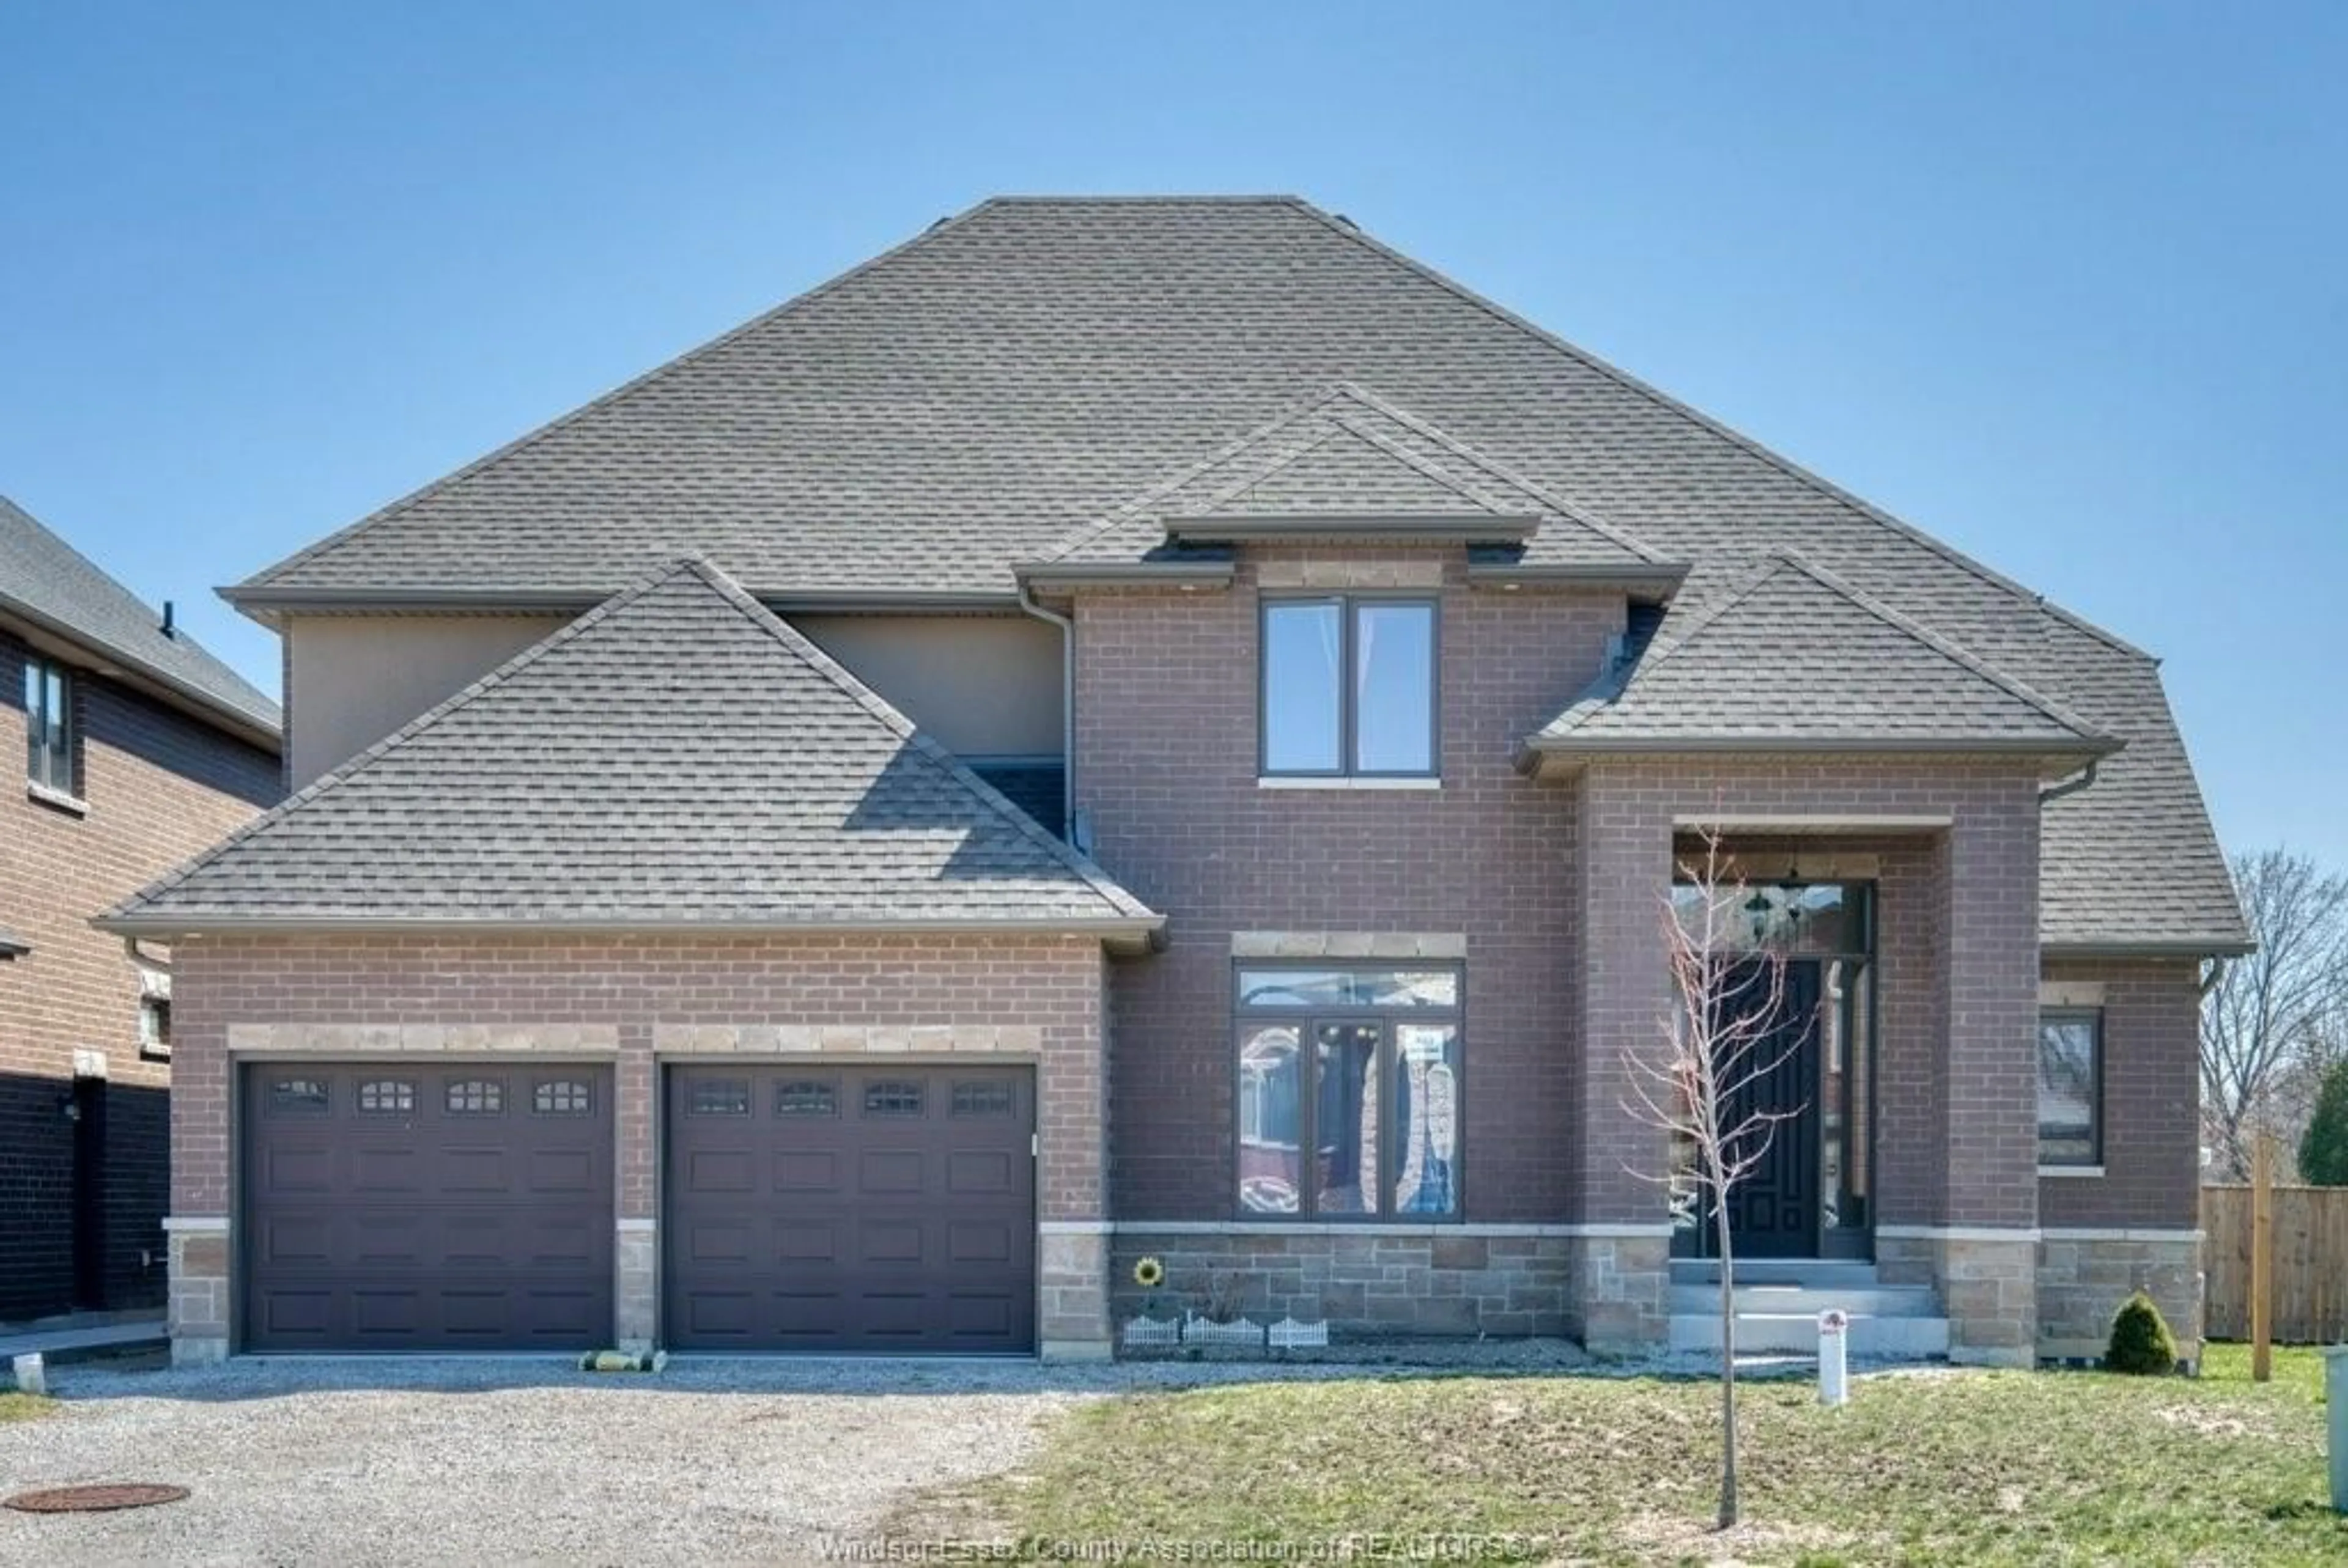 Home with brick exterior material for 525 MAGUIRE St, Windsor Ontario N9E 0A6